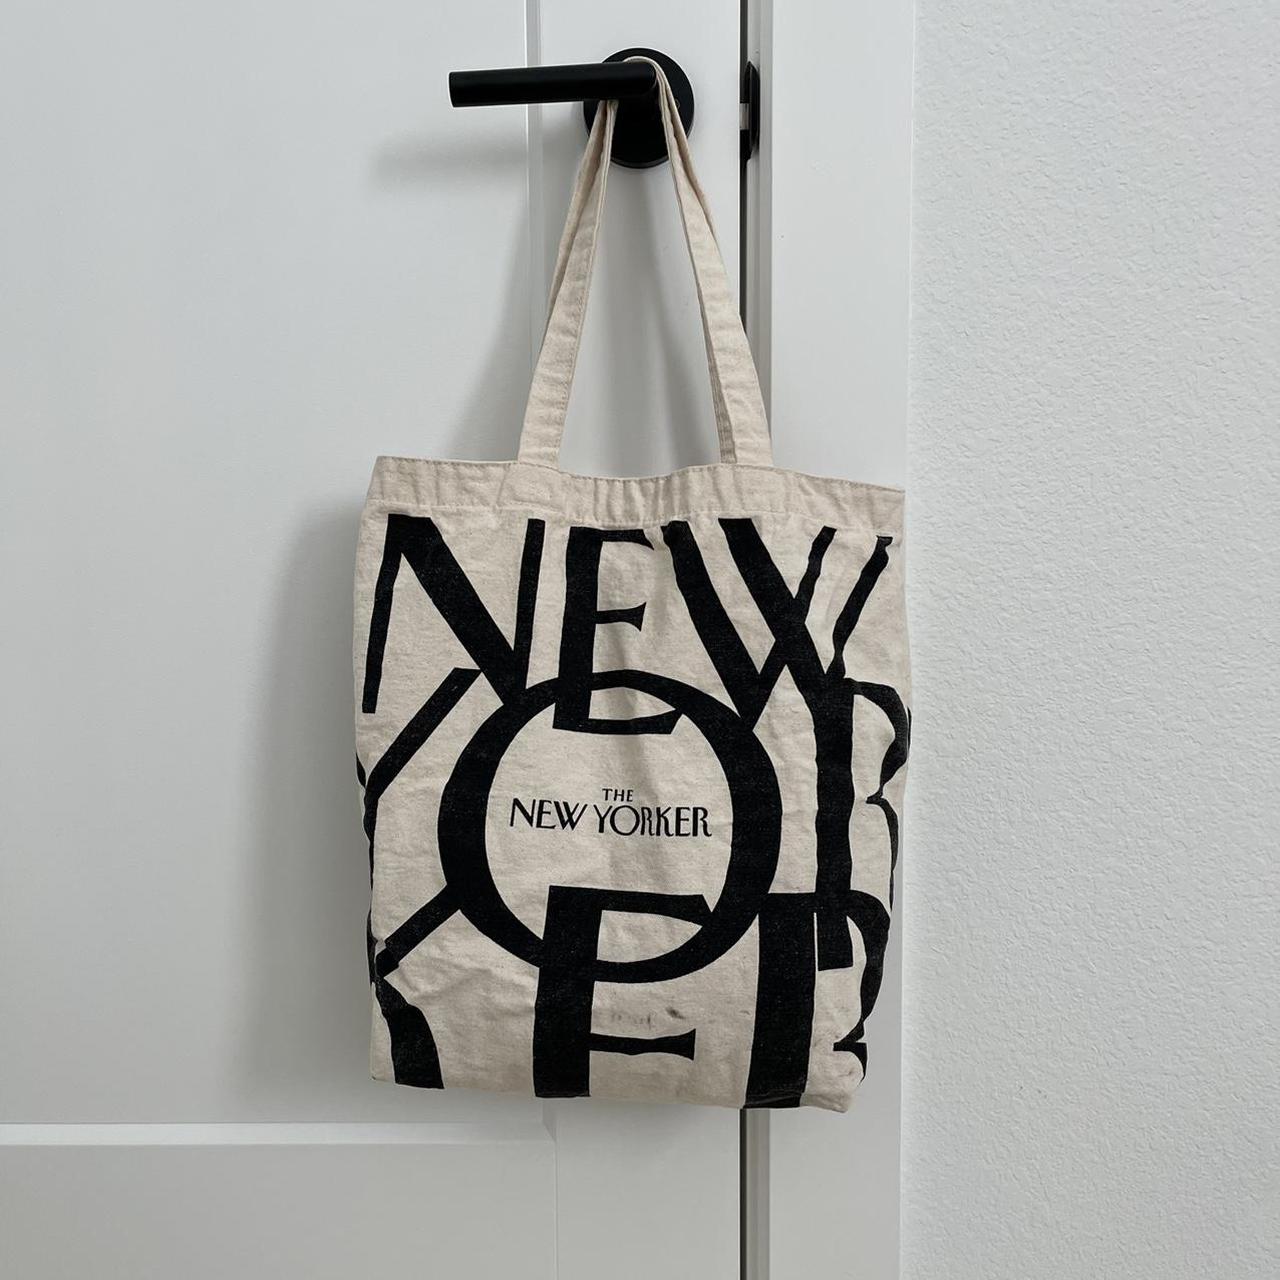 Brand New Limited Edition The New Yorker Tote Bag! Recline Readers | eBay